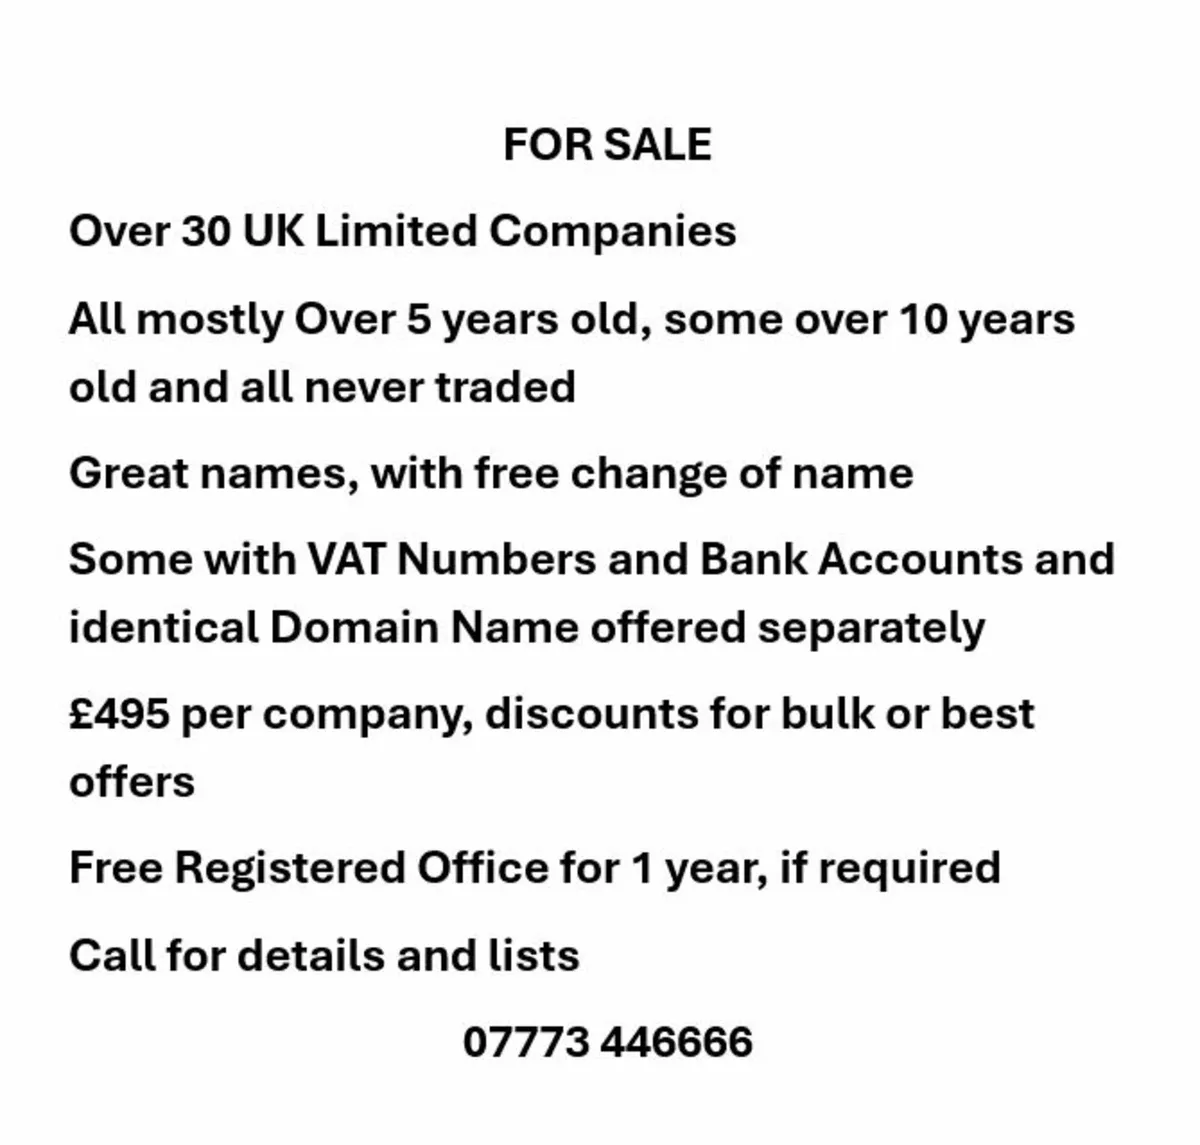 UK Limited Companies For Sale,  Over 5 years old - Image 1